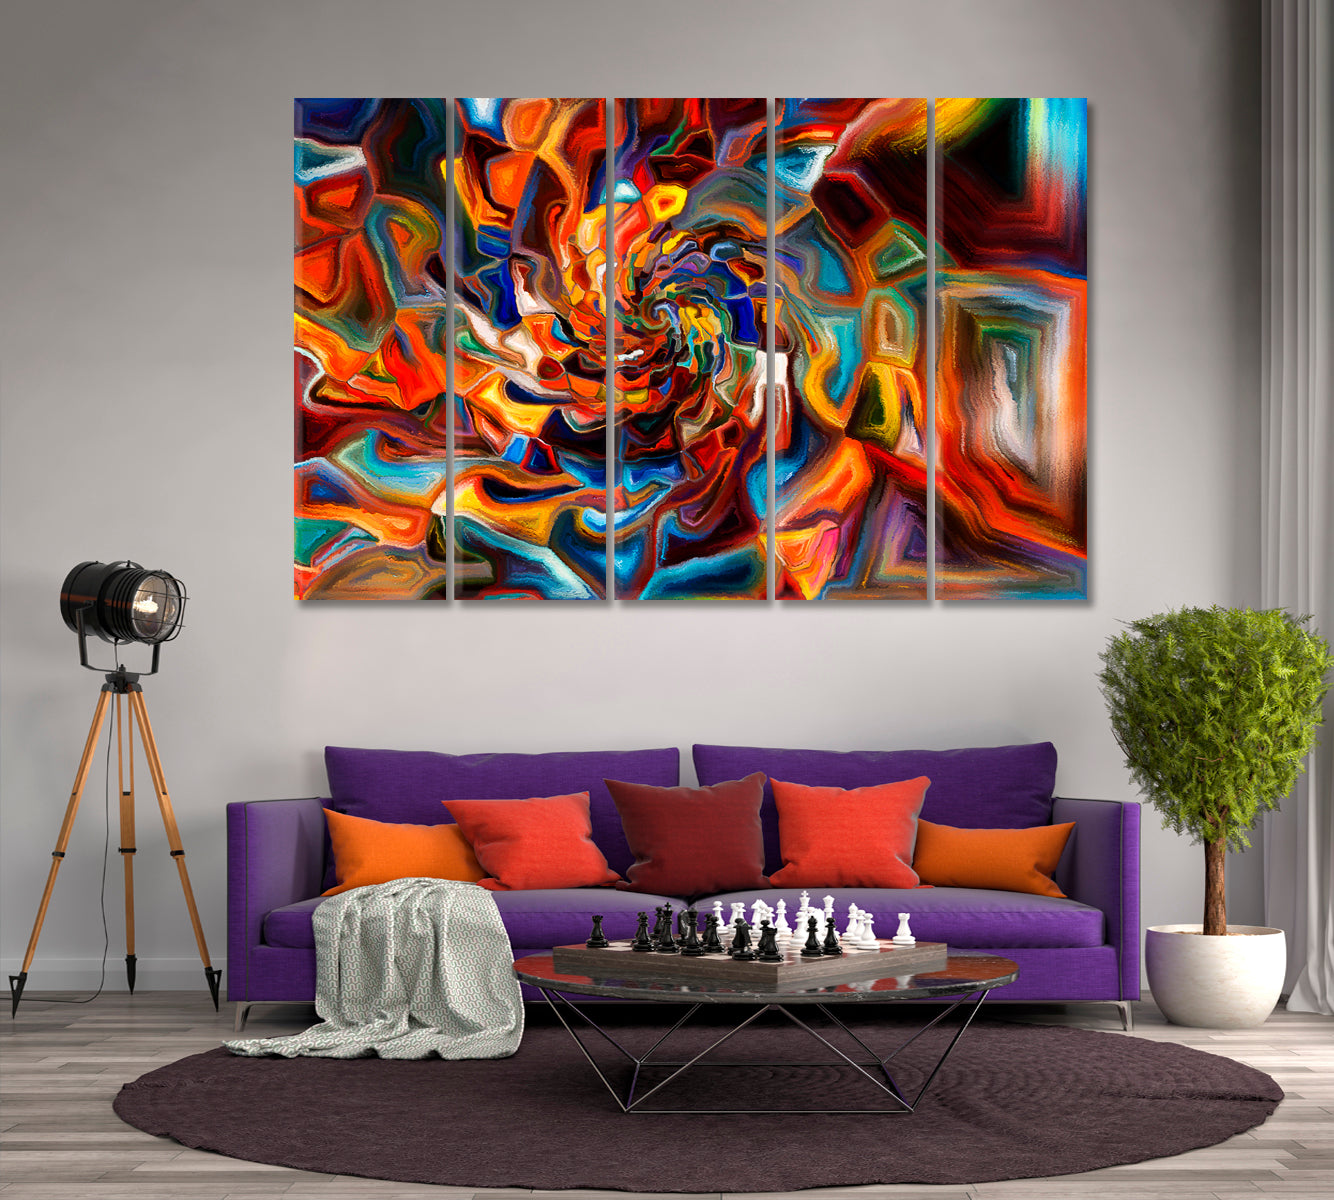 Shards Abstract Pattern Abstract Art Print Artesty 5 panels 36" x 24" 